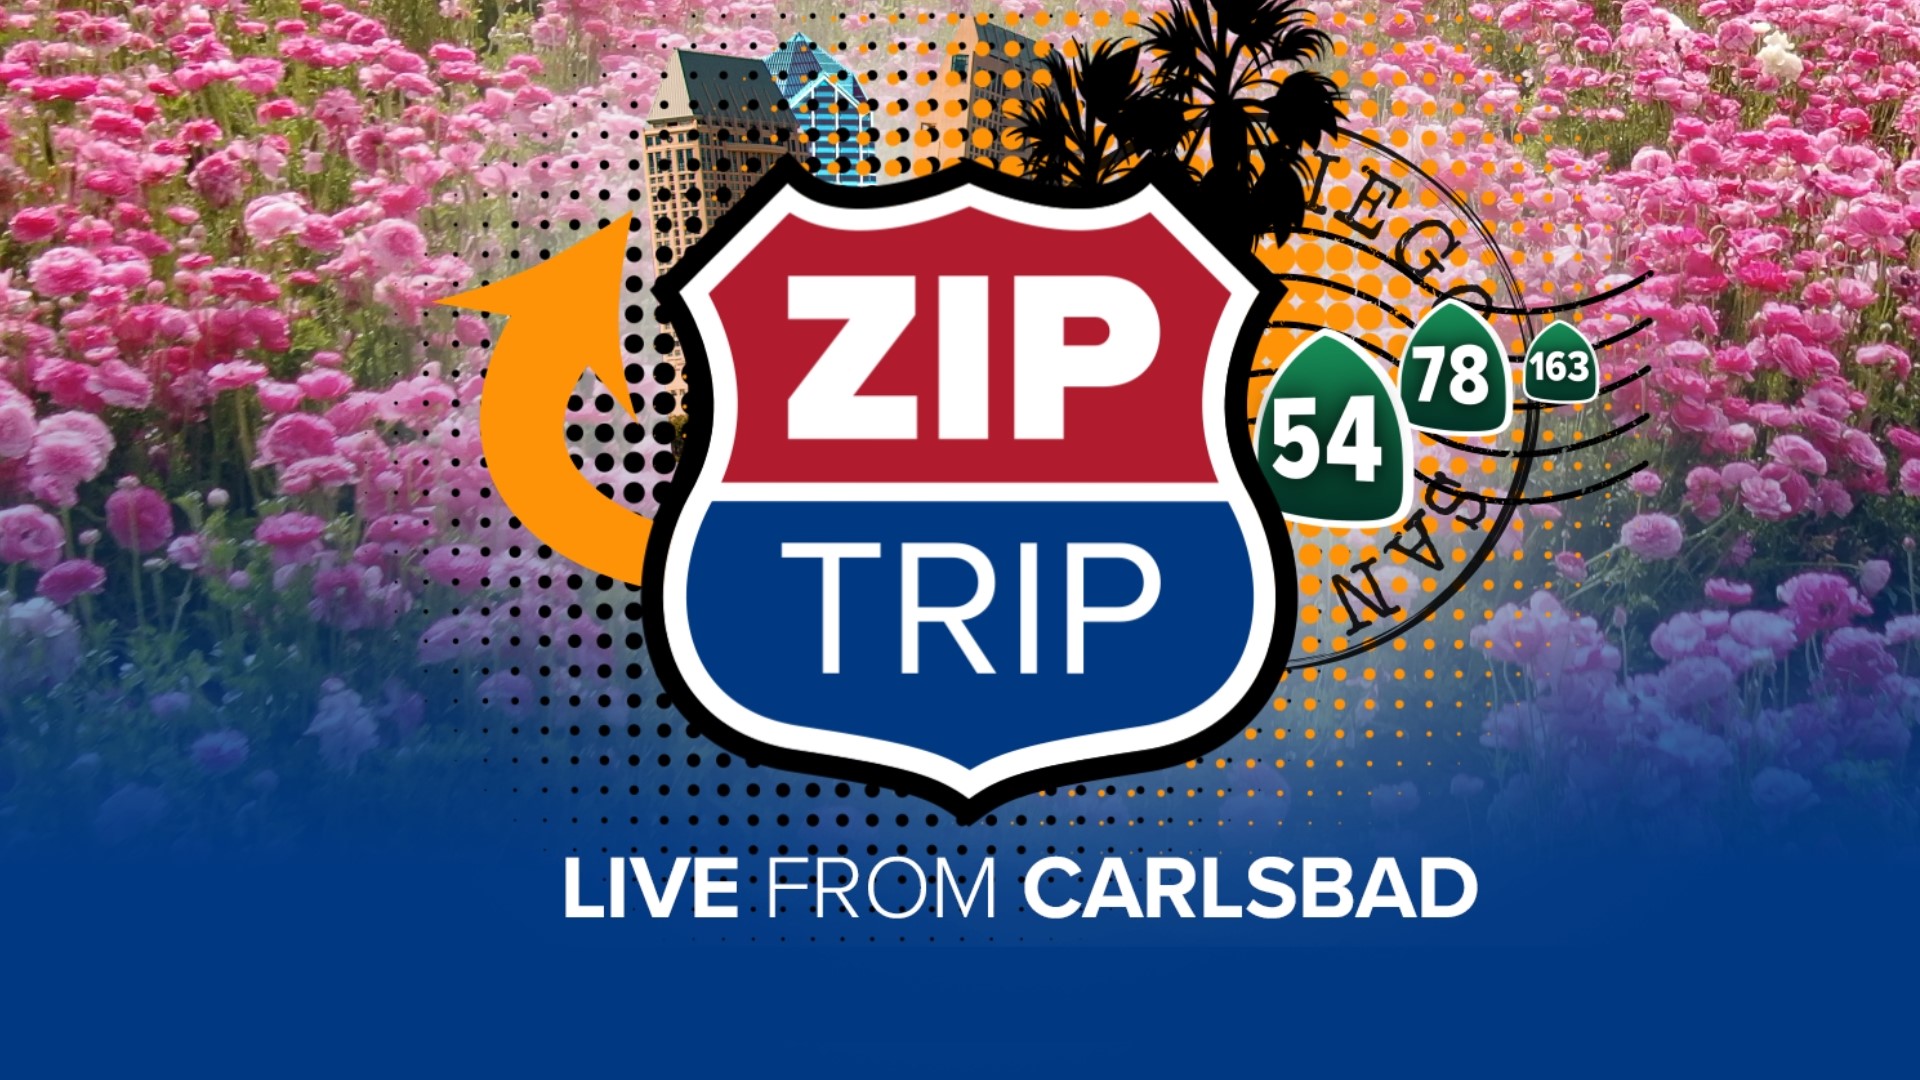 CBS 8 is hitting the road to feature the vibrant areas of San Diego County. On this Zip Trip, we visit Carlsbad and all that makes this community great.